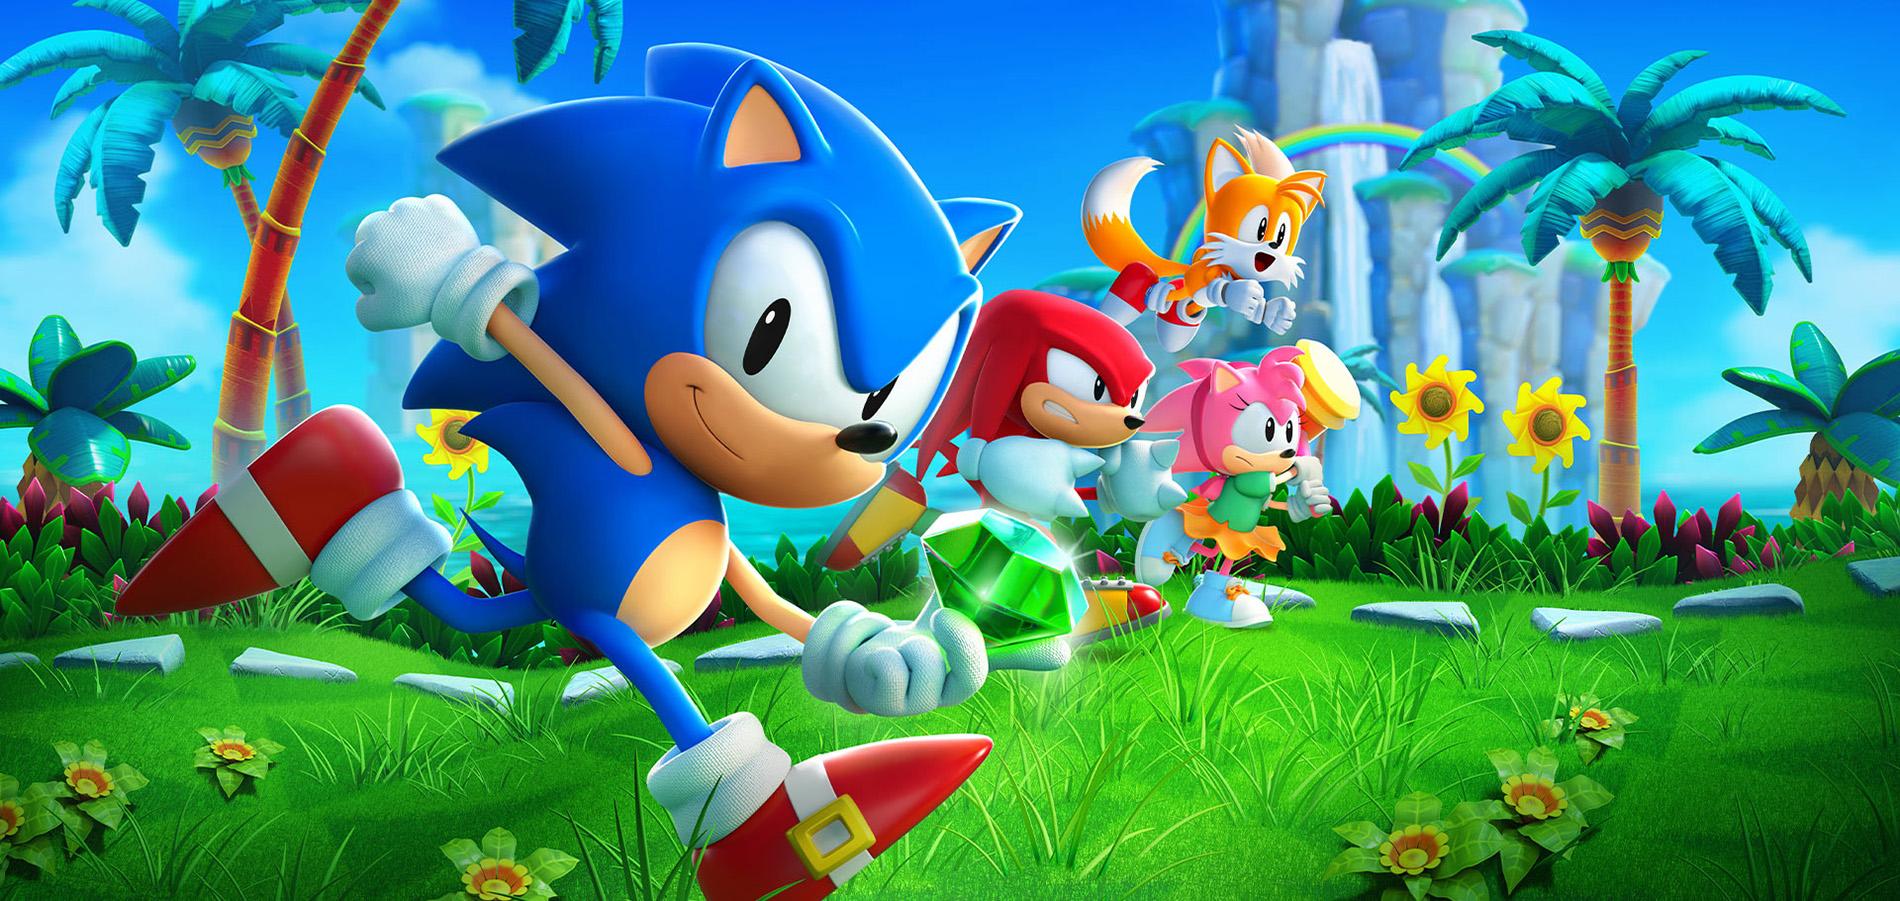 Sonic the Hedgehog 2 prepped for 4K Blu-ray release on August 8